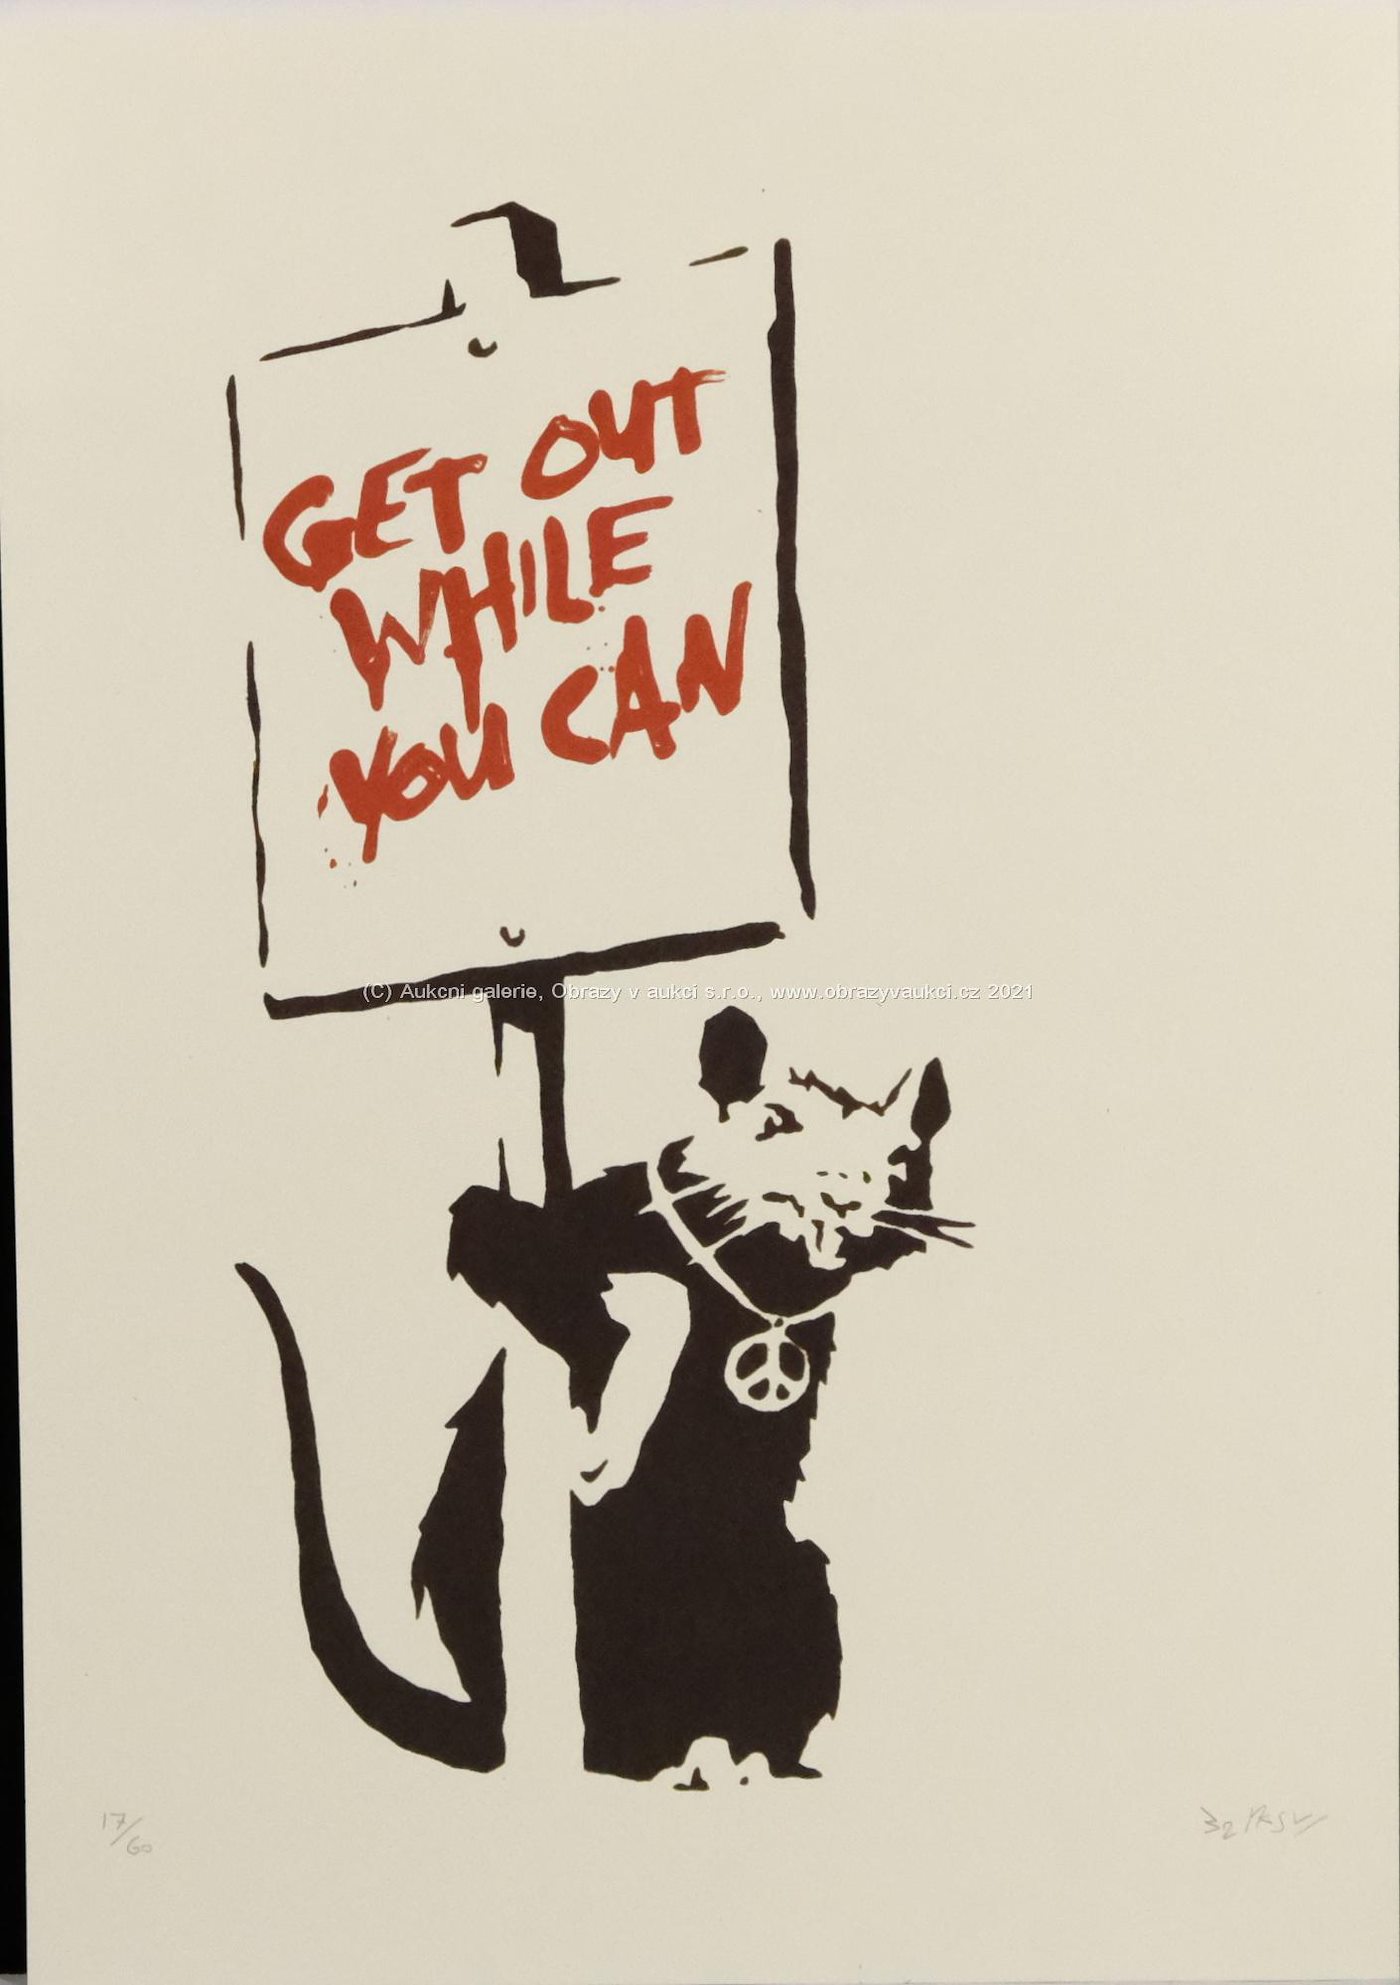 Banksy - Get out while you can